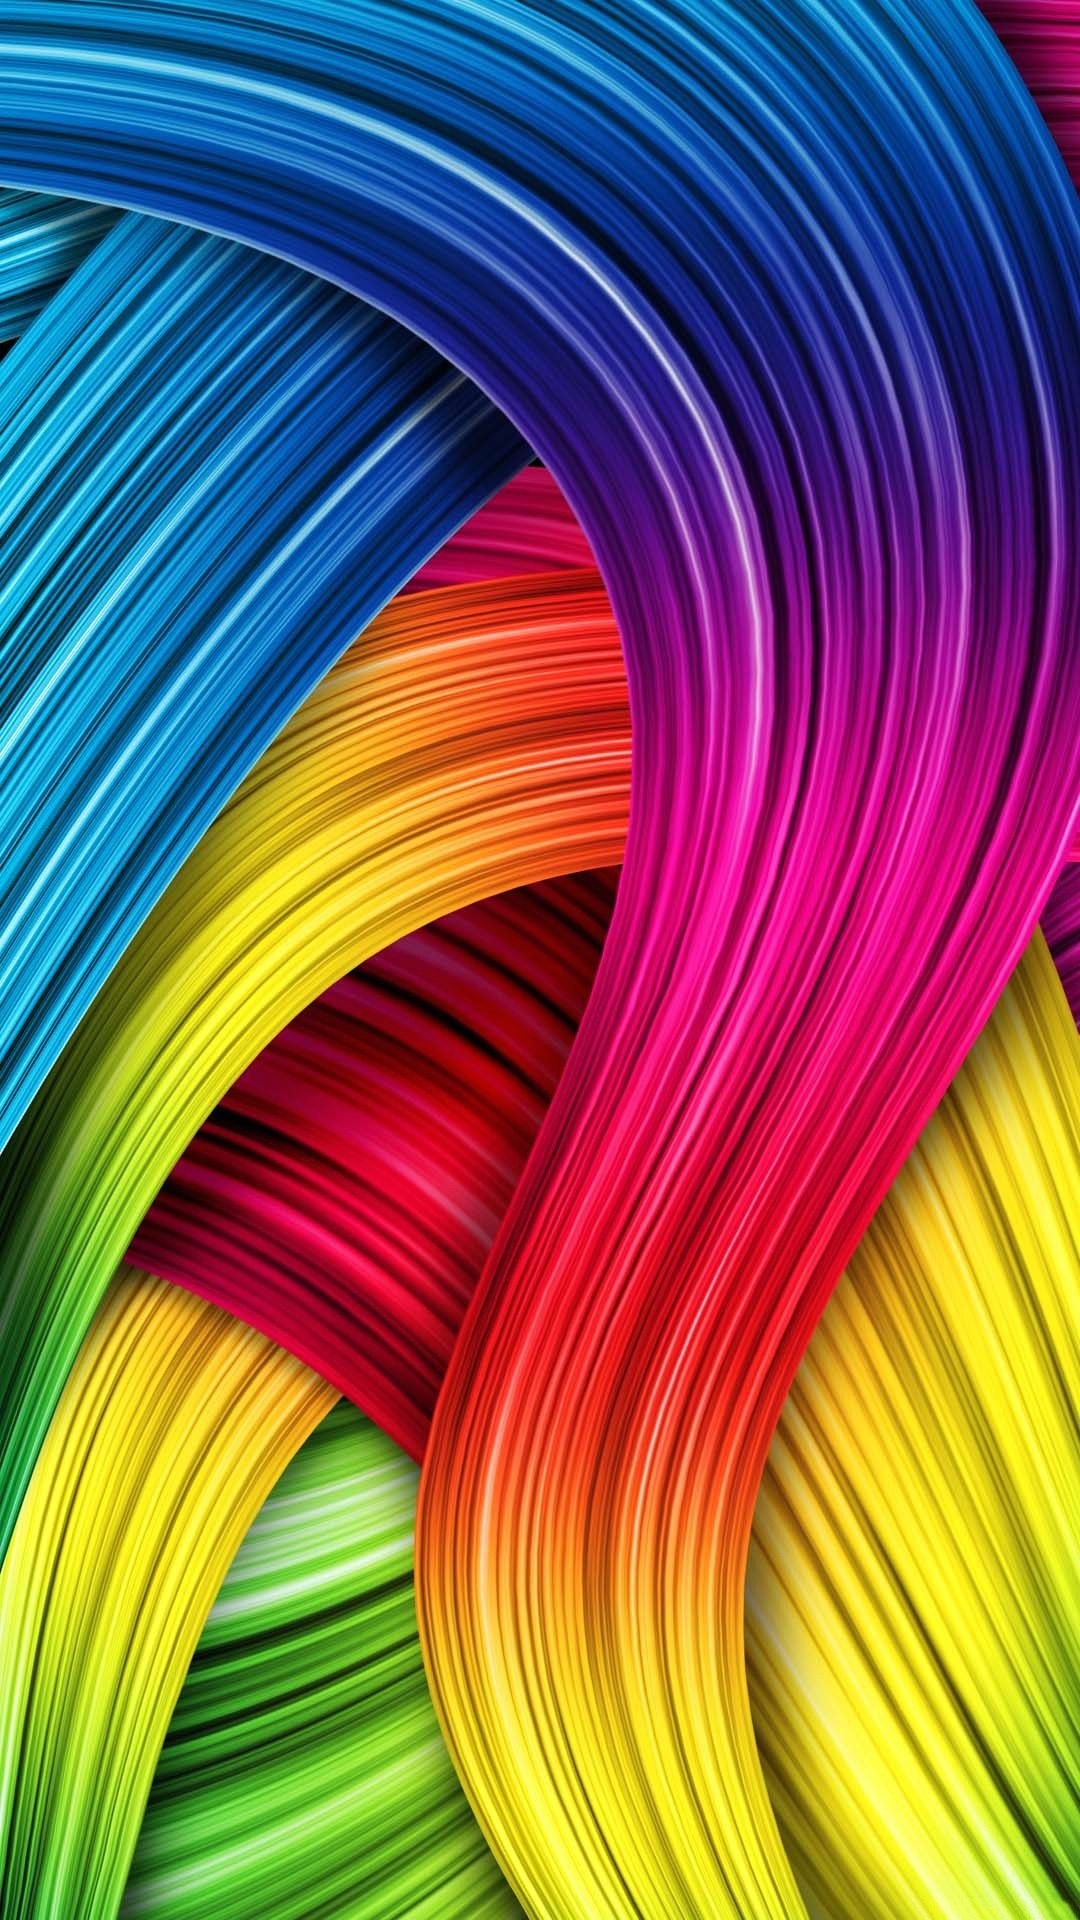 Colorful i Phones Wallpaper With high-resolution 1080X1920 pixel. Download all Mobile Wallpapers and Use them as wallpapers for your iPhone, Tablet, iPad, Android and other mobile devices